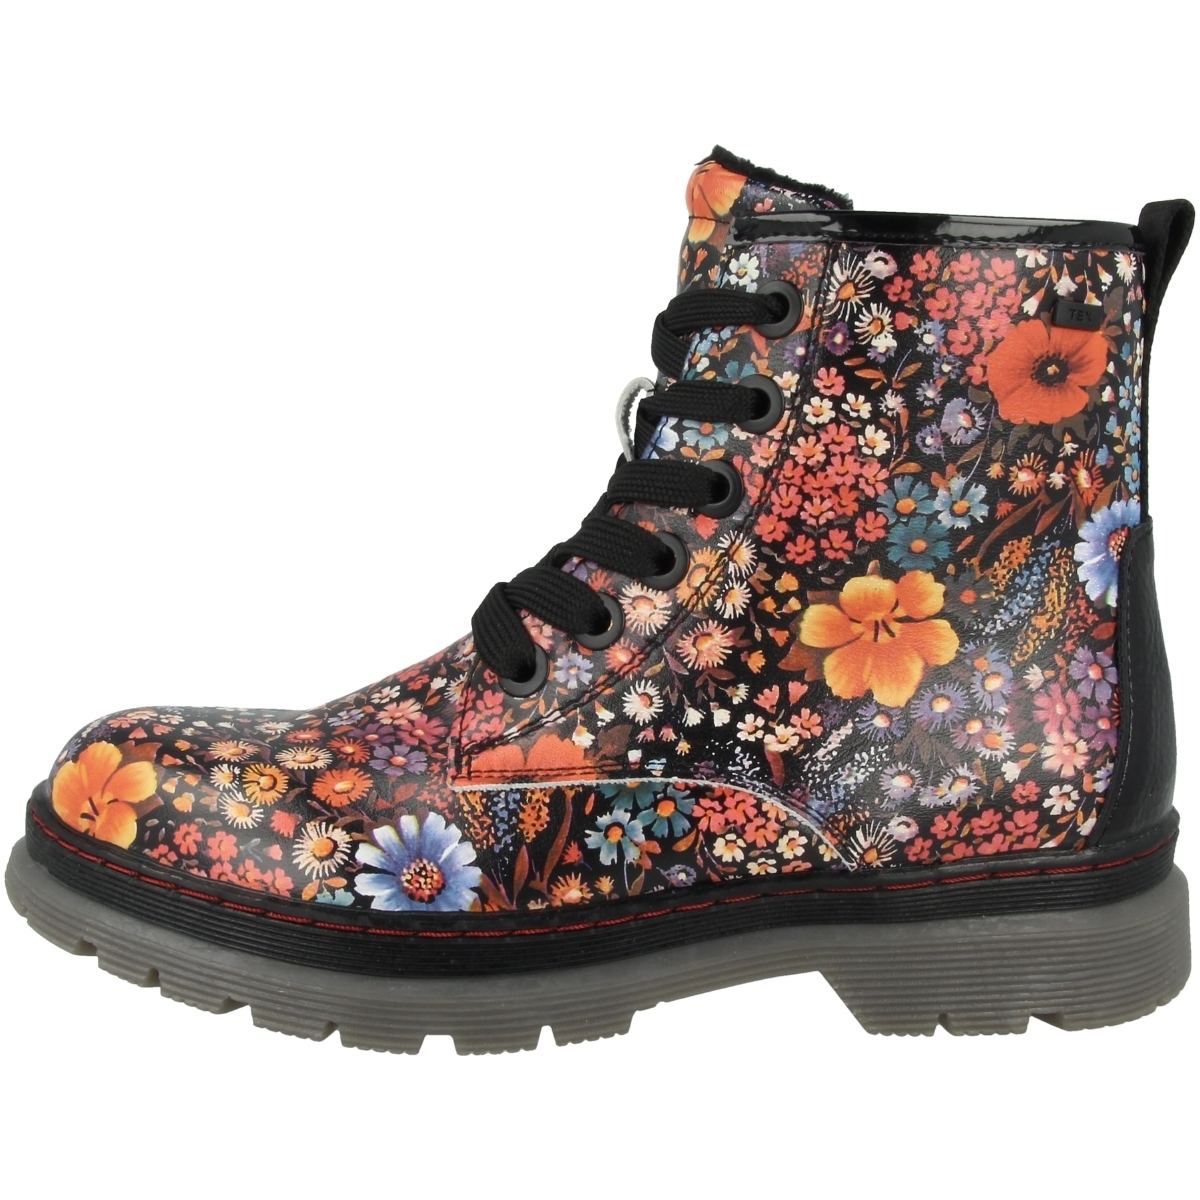 Tom Tailor 2173603 Boots multicolor